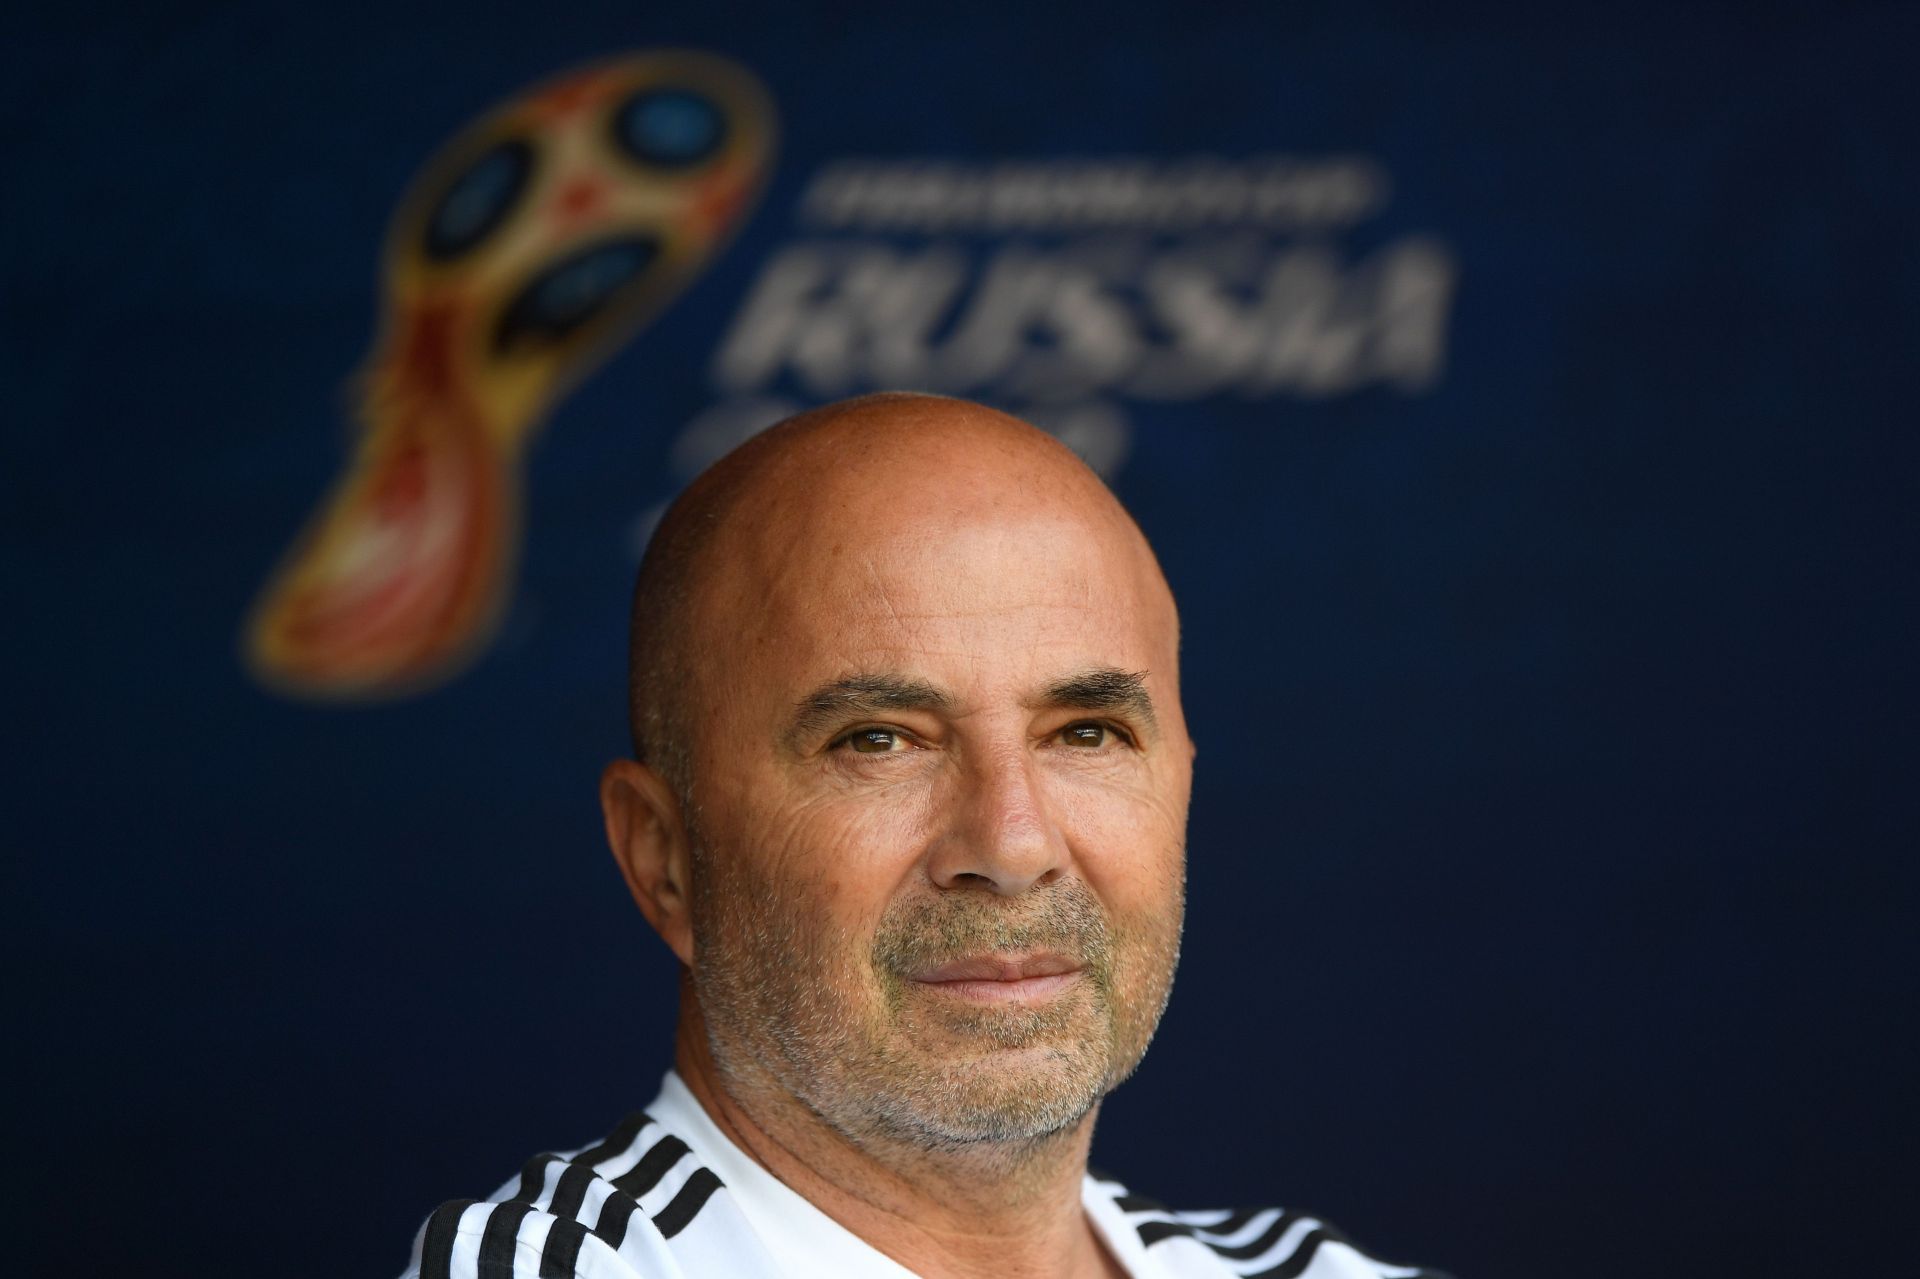 Jorge Sampaoli most recently managed Olympique Marseille after stints with Argentina and Chile.